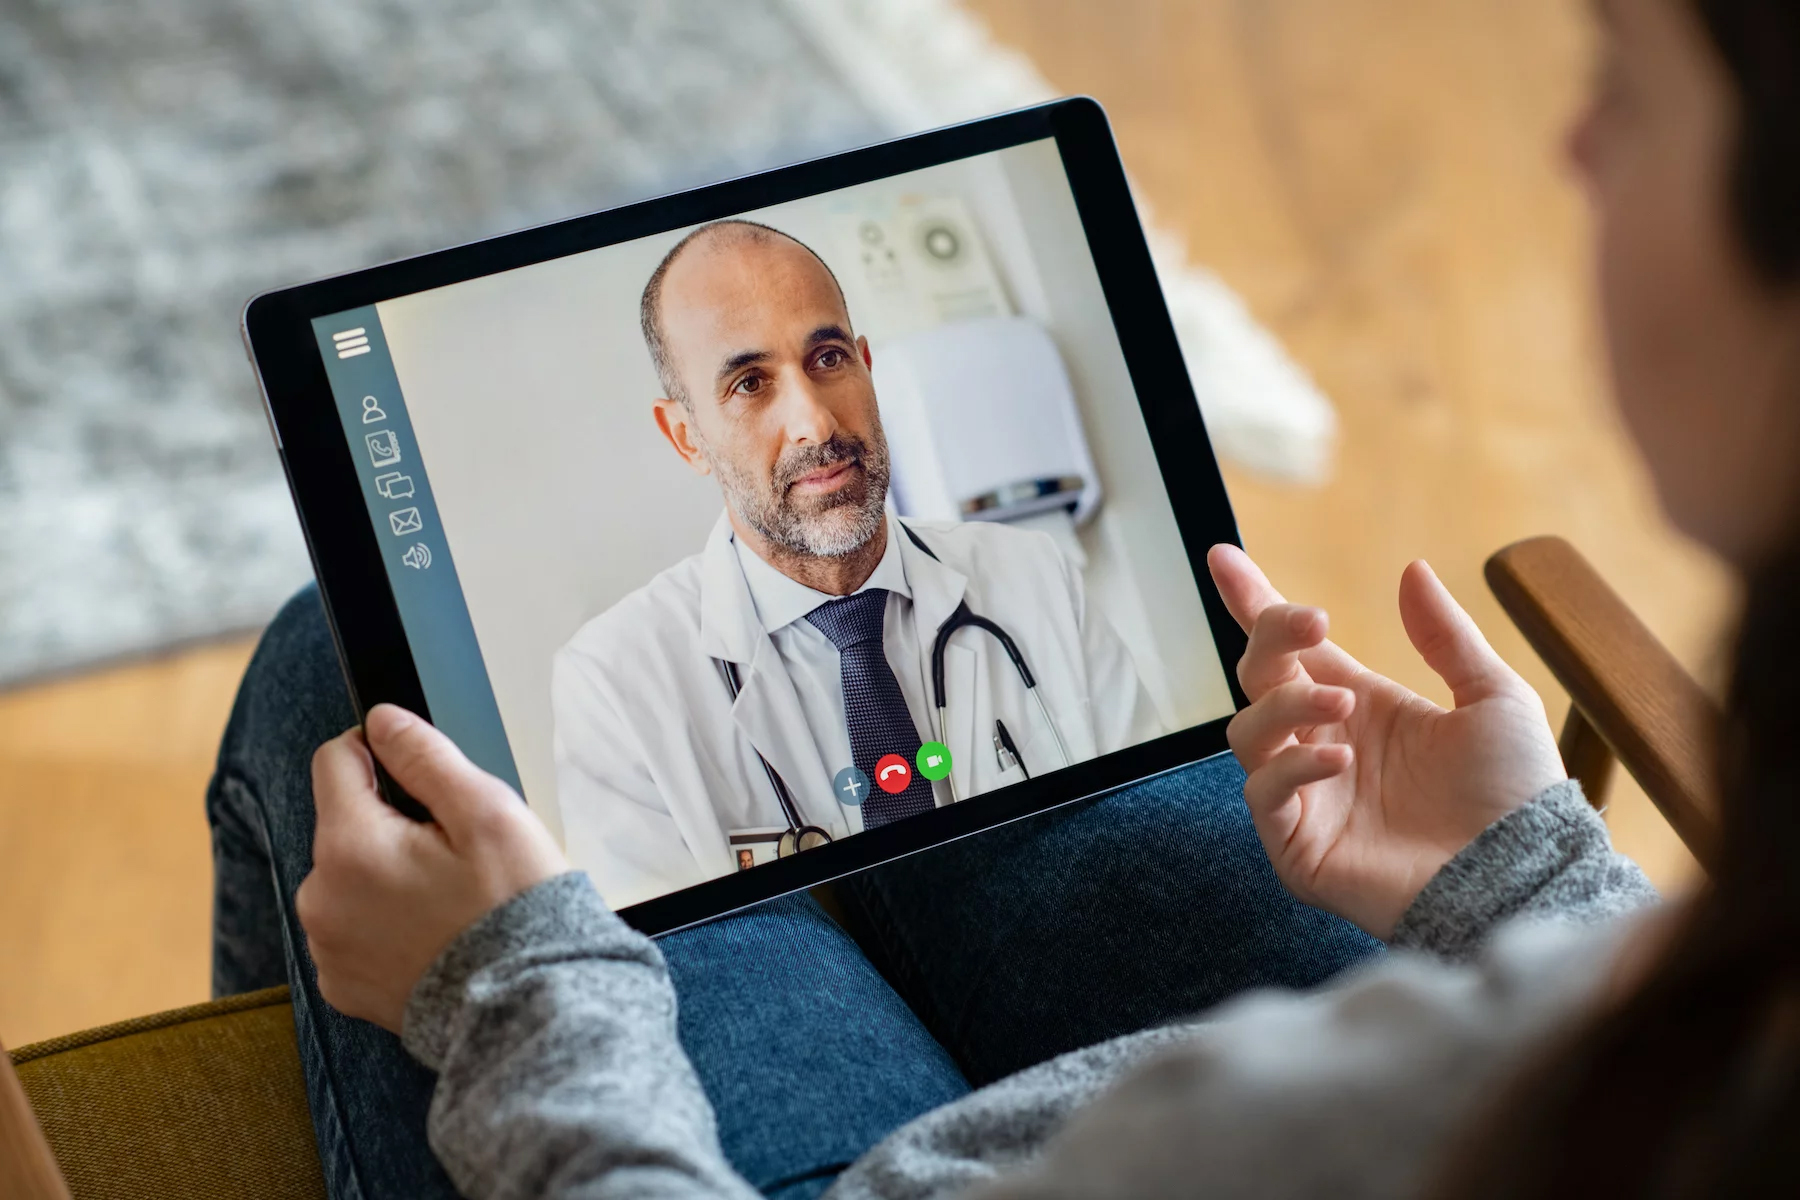 Woman on a video call with her doctor from home via tablet